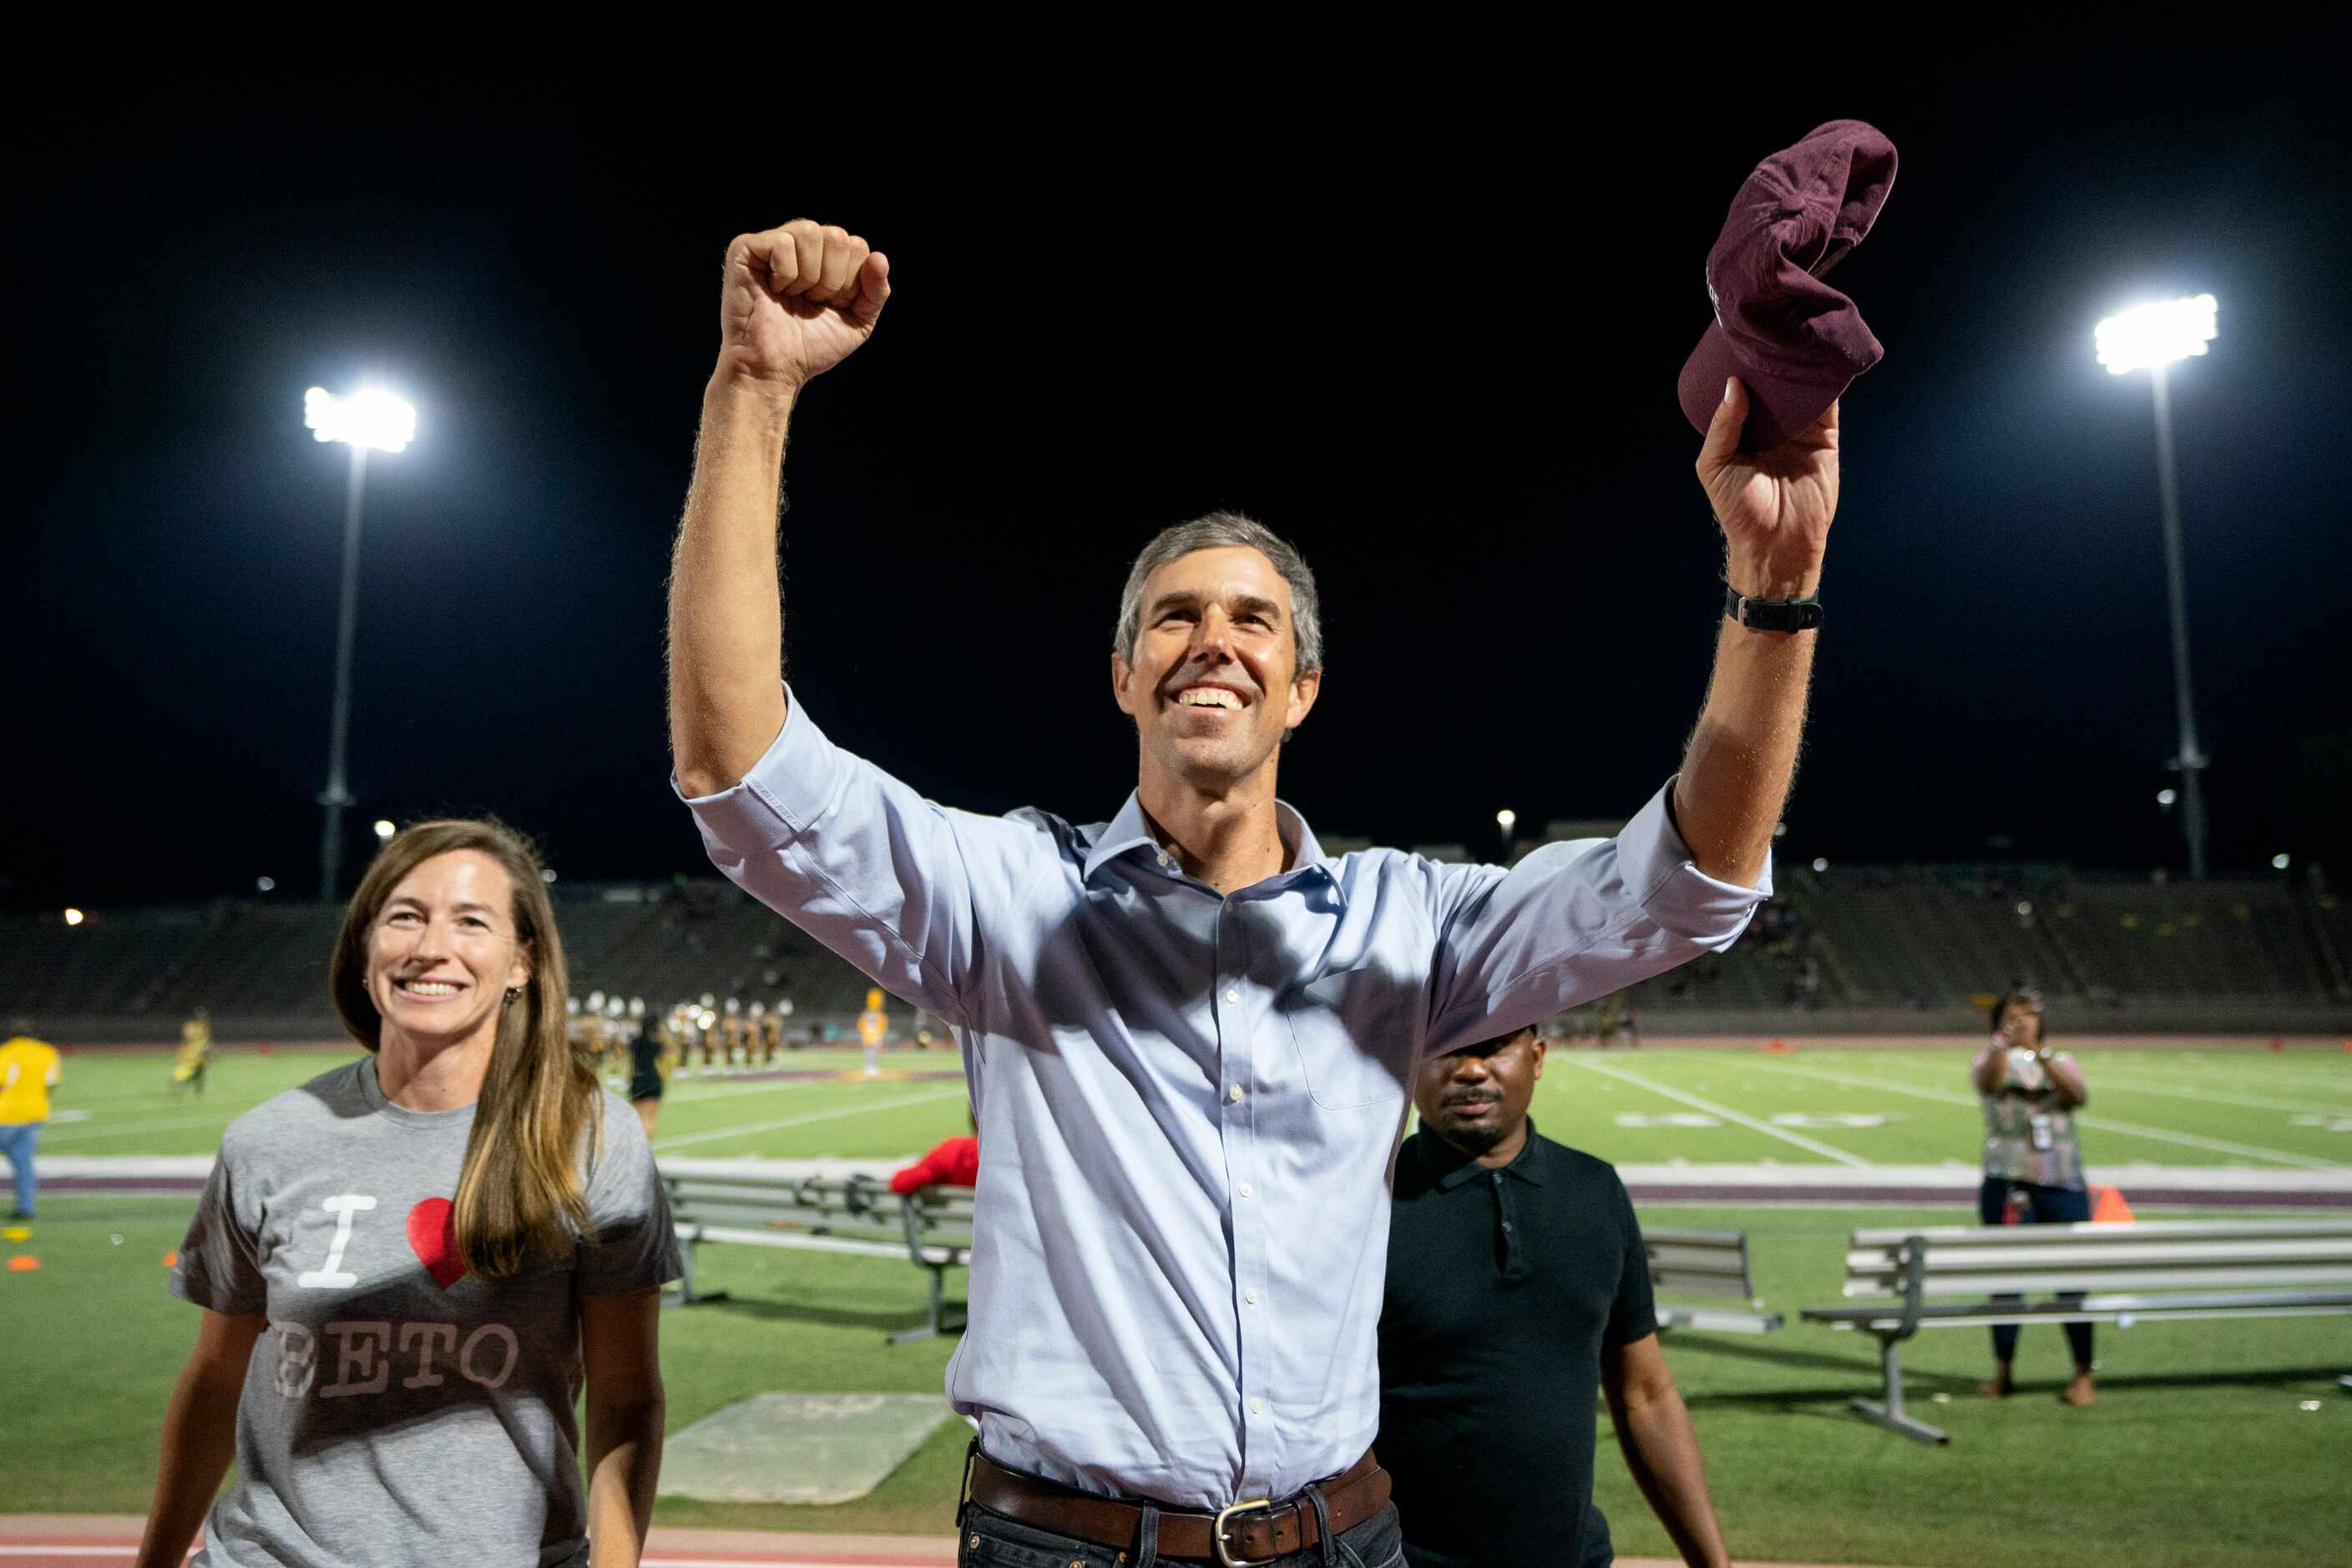 Texas gubernatorial candidate Beto O’Rourke, with his wife Amy Hoover Sanders, waves to the...